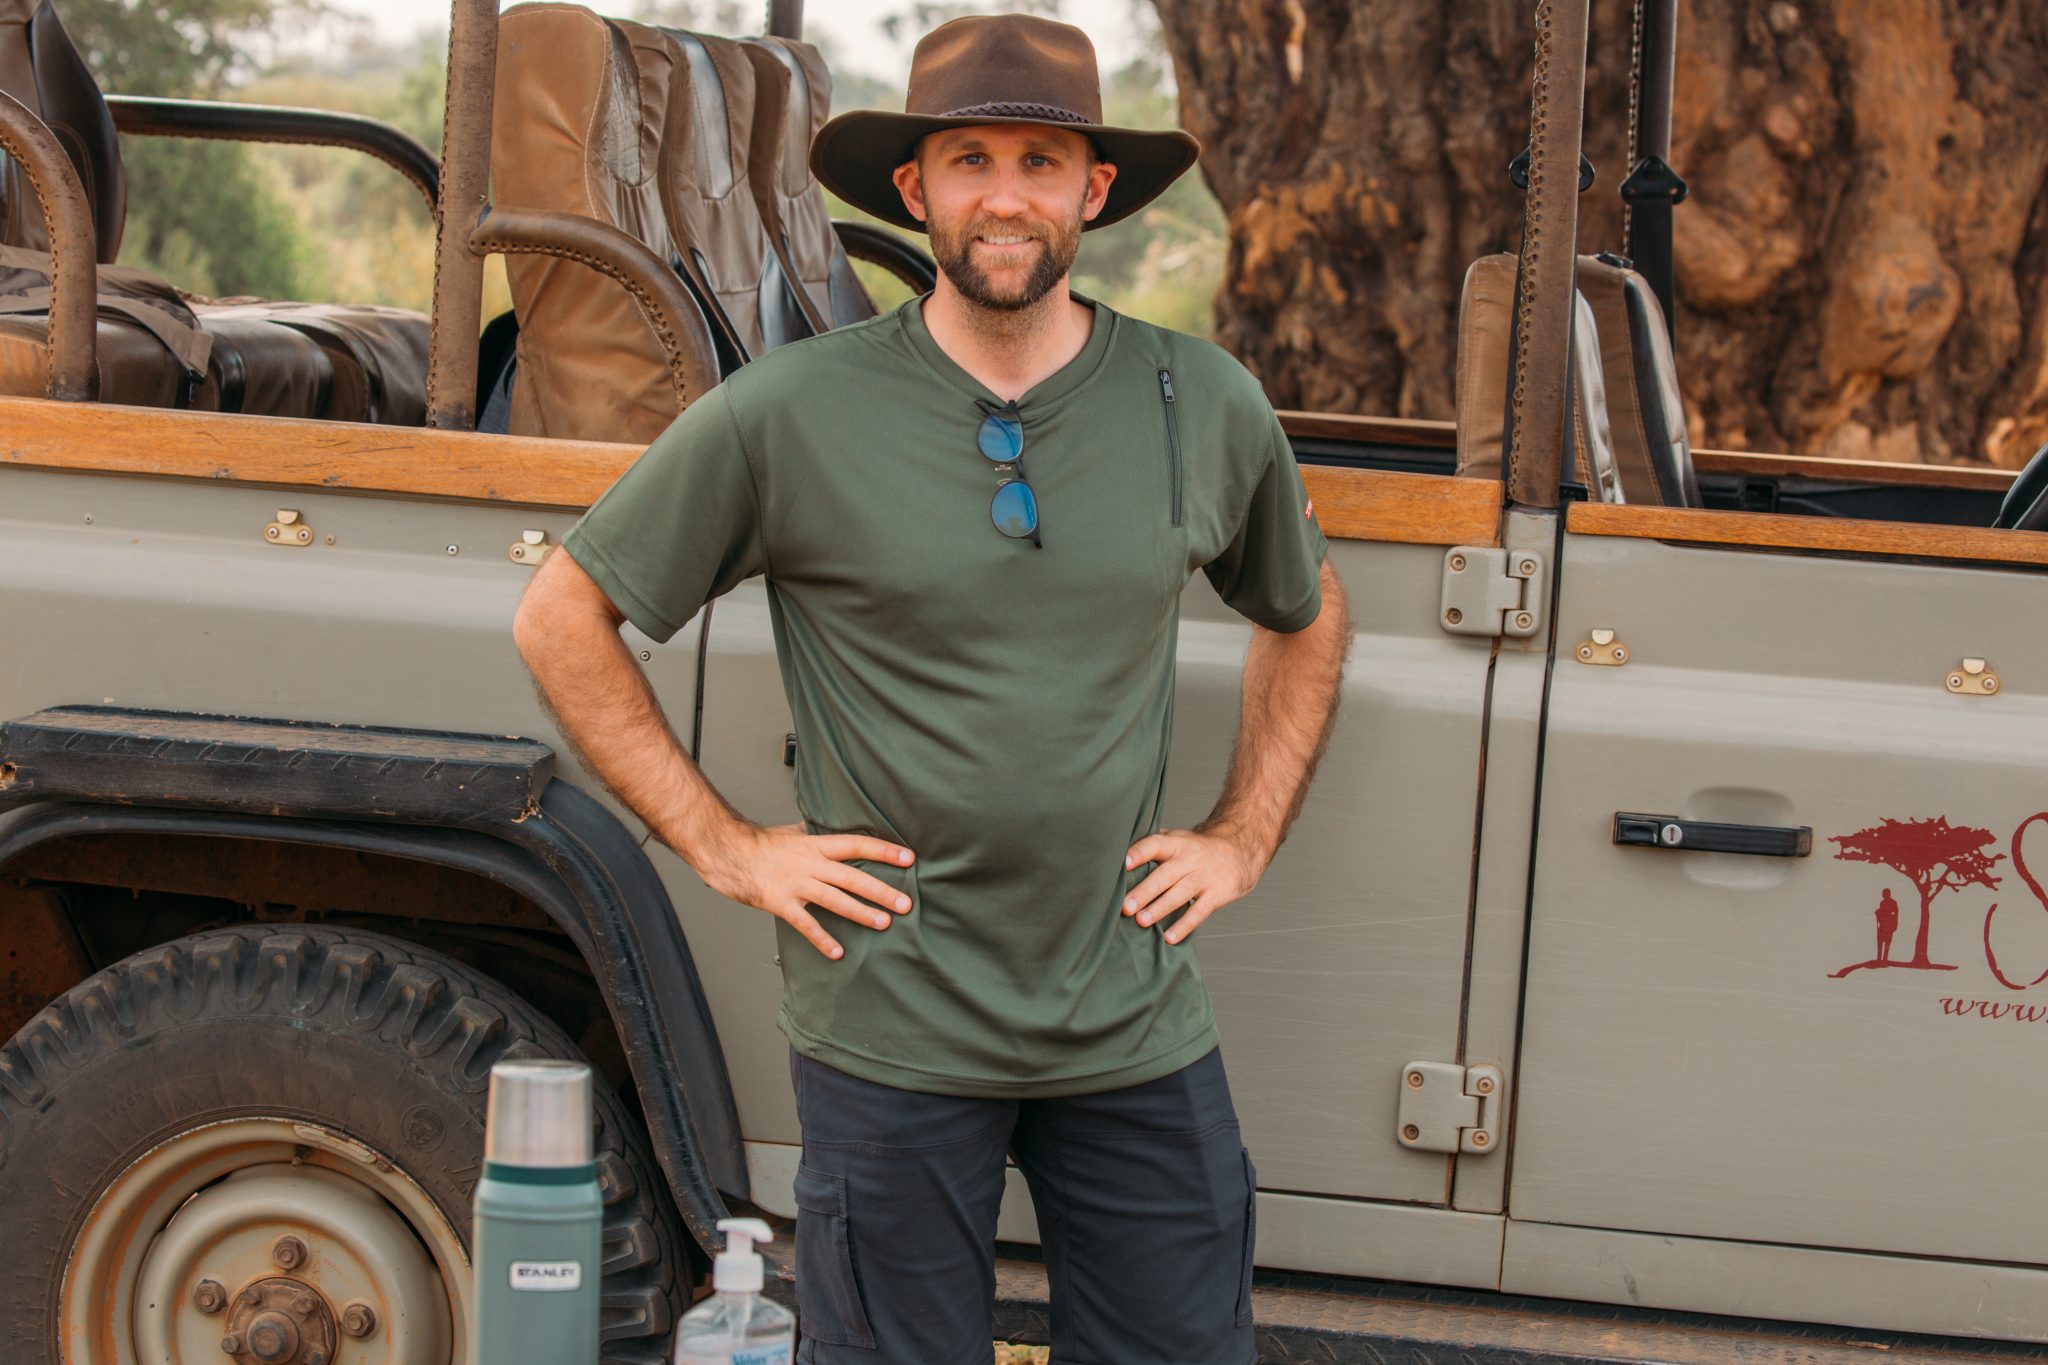 Safari Outfits for Both Women and Men: Practical Tips and Inspiration